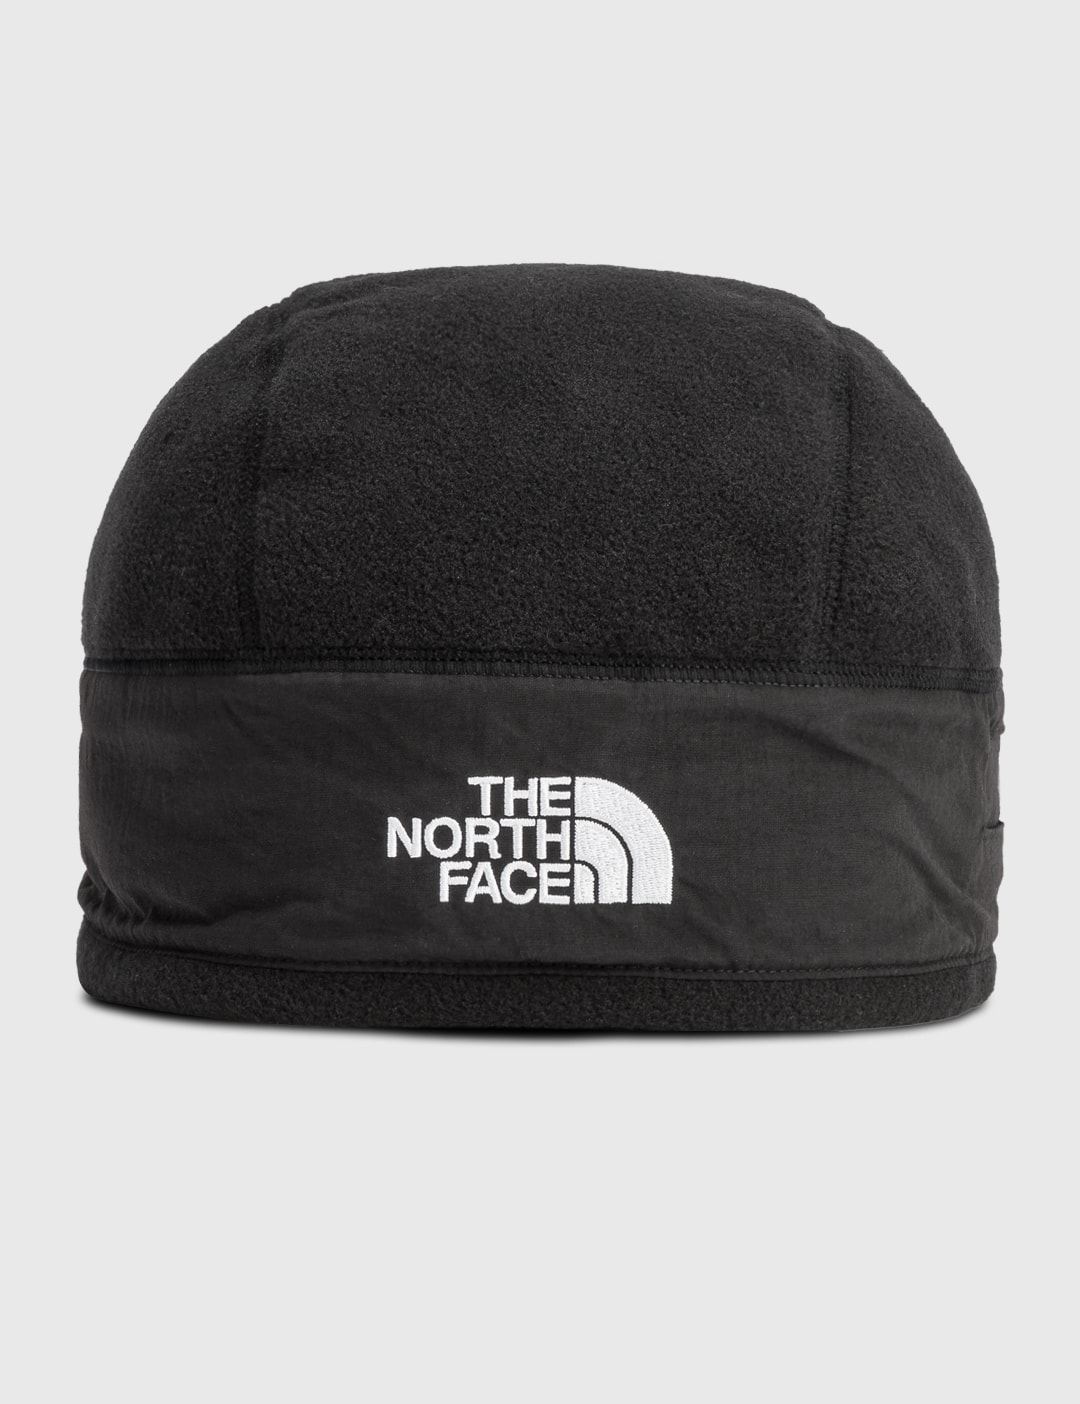 The North Face - Denali Beanie | HBX - Globally Curated Fashion and ...